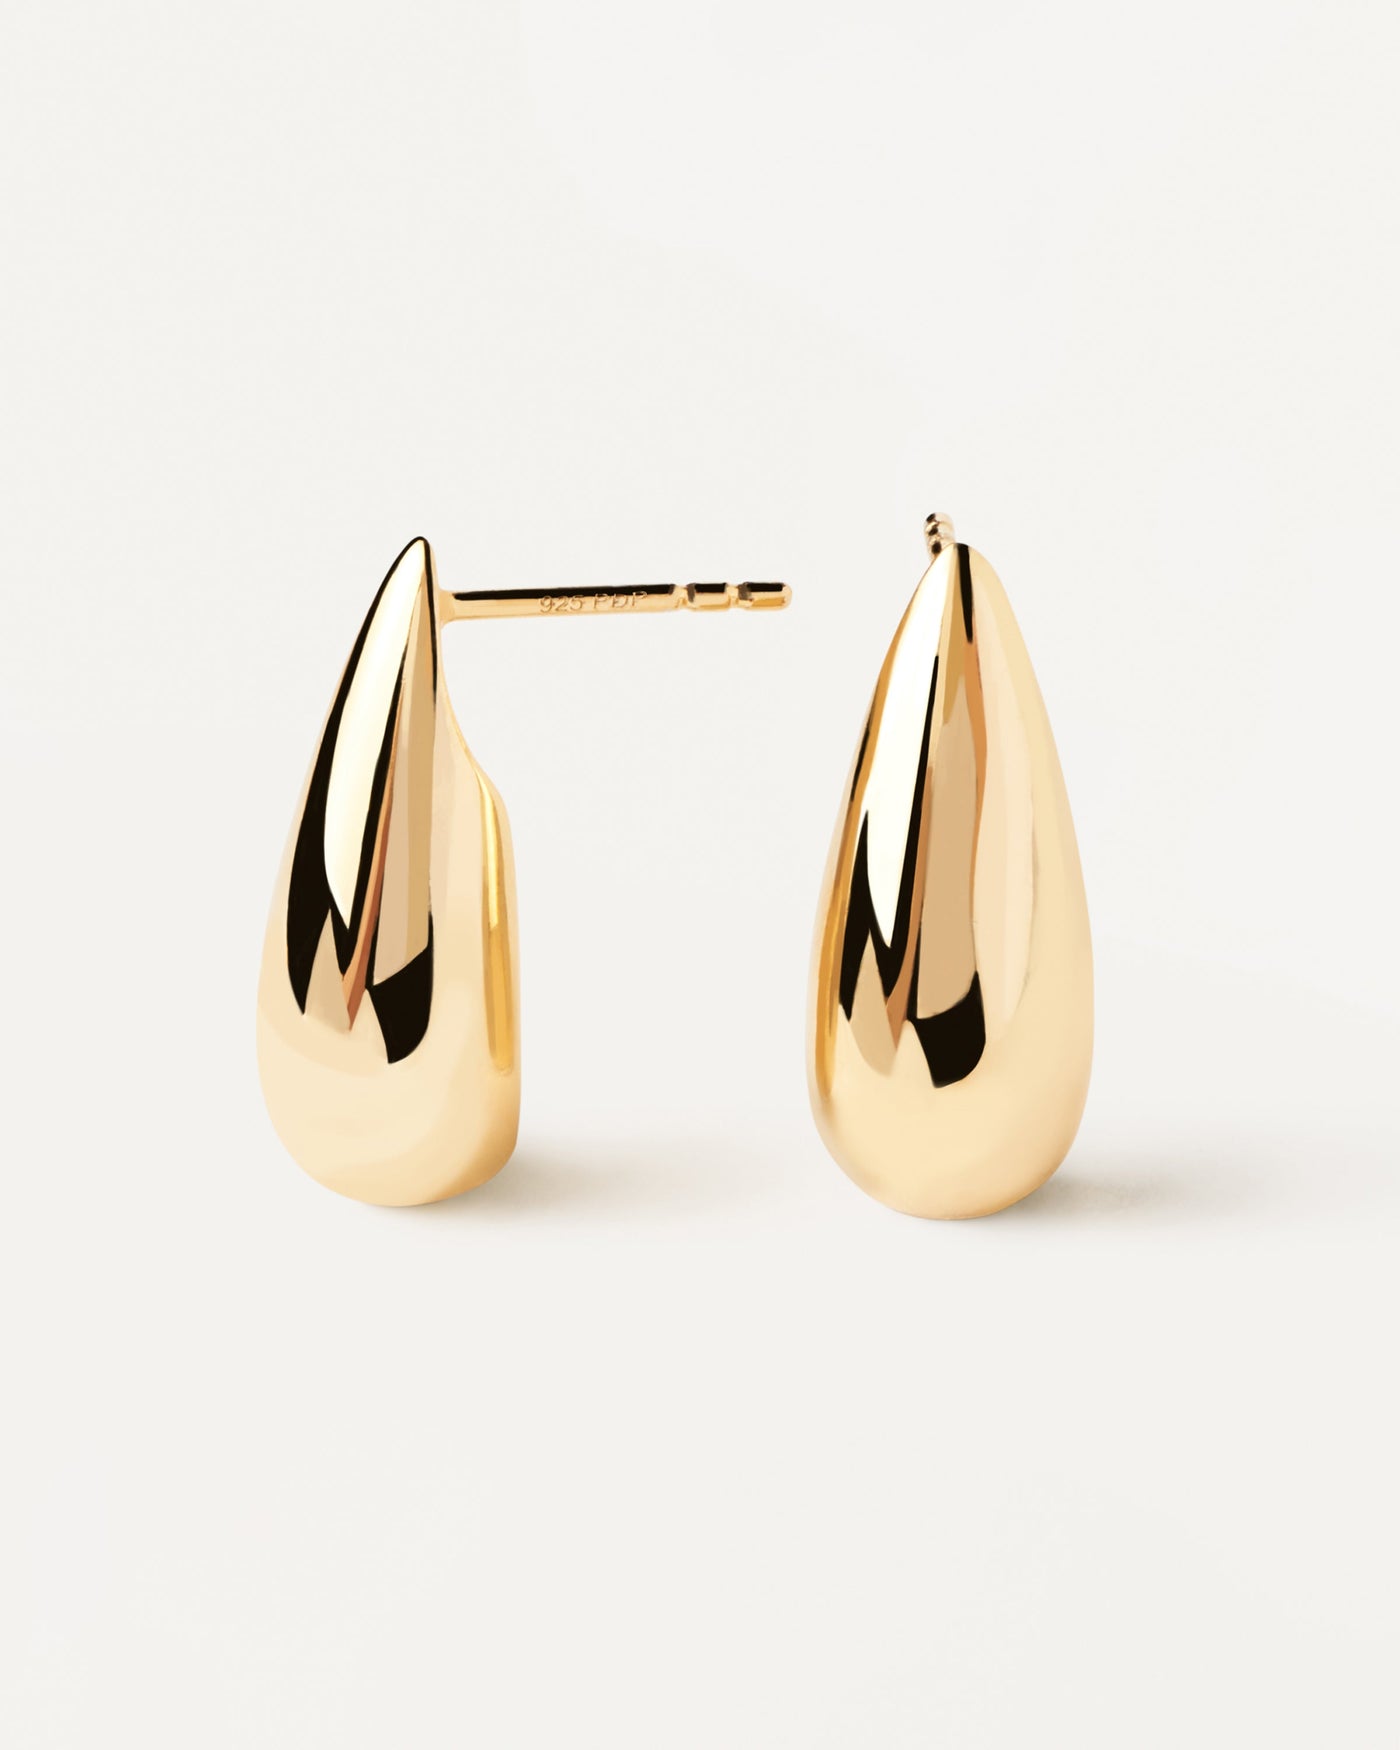 2023 Selection | Large Sugar Earrings. Drop shaped stud earrings in gold-plated silver. Get the latest arrival from PDPAOLA. Place your order safely and get this Best Seller. Free Shipping.